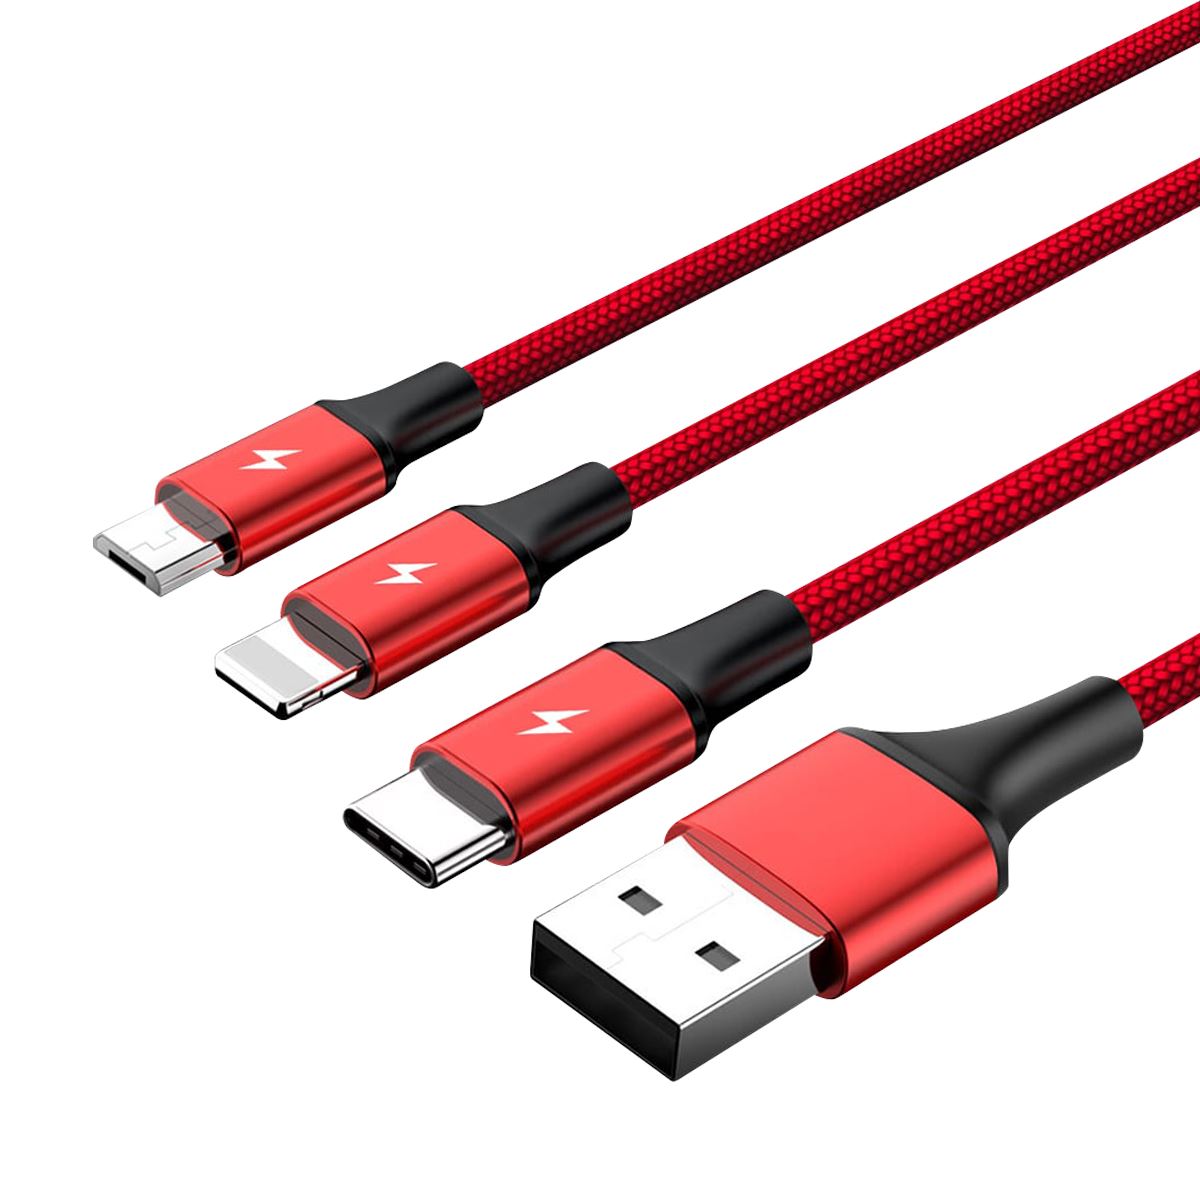 UNITEK_1.2m_USB_3-in-1_Charge_Cable._Integrated_USB-A_to_Micro-B,_Lightning_Connector_&_USB-C_Connector._Red_Colour. 380